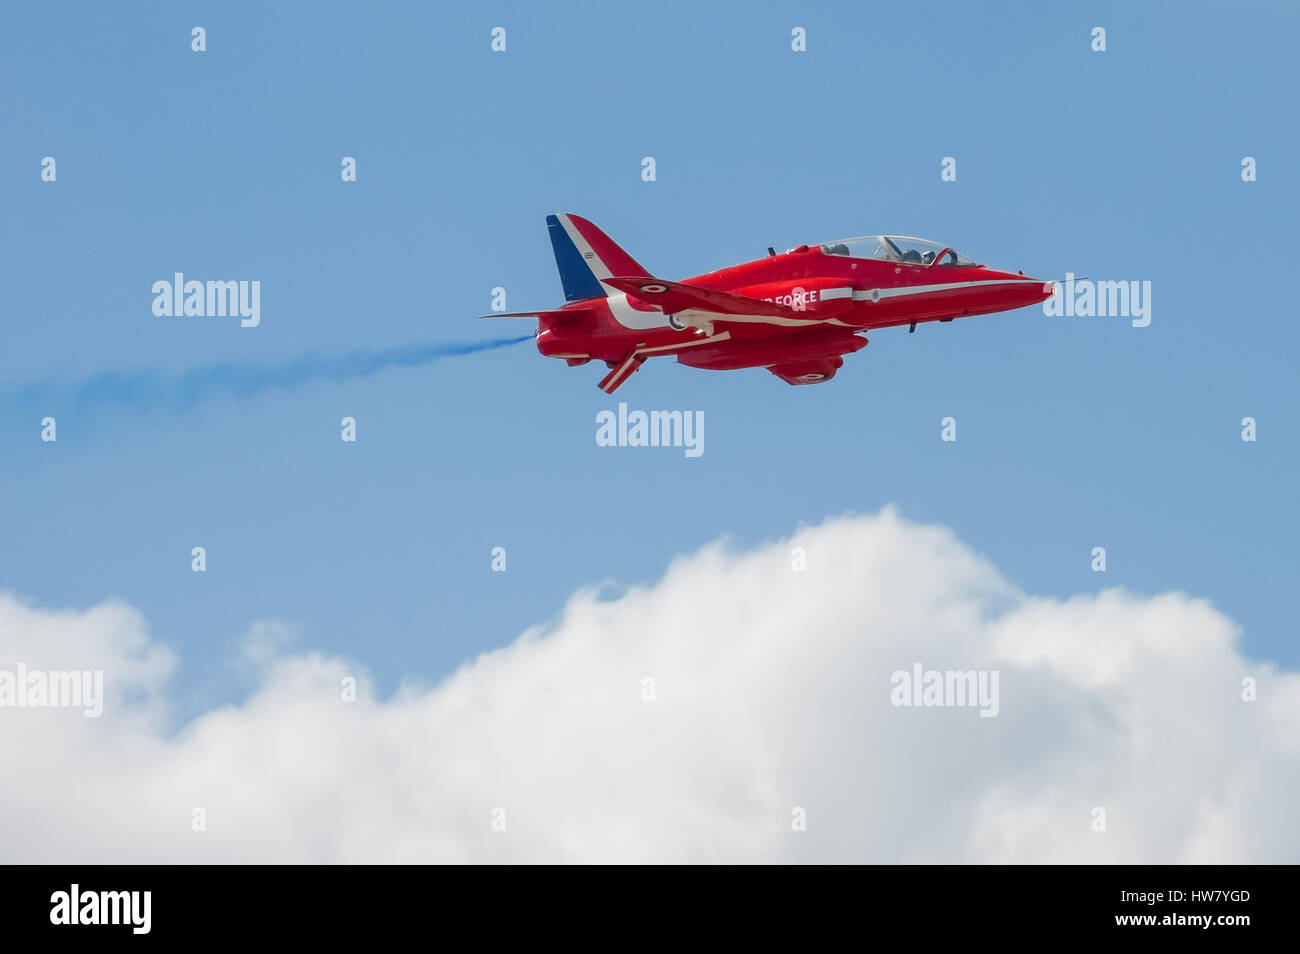 Farnborough, UK - July 15, 2010: Low level pass by a Red Arrows aerobatic display jet during the Farnborough International Airshow, UK Stock Photo